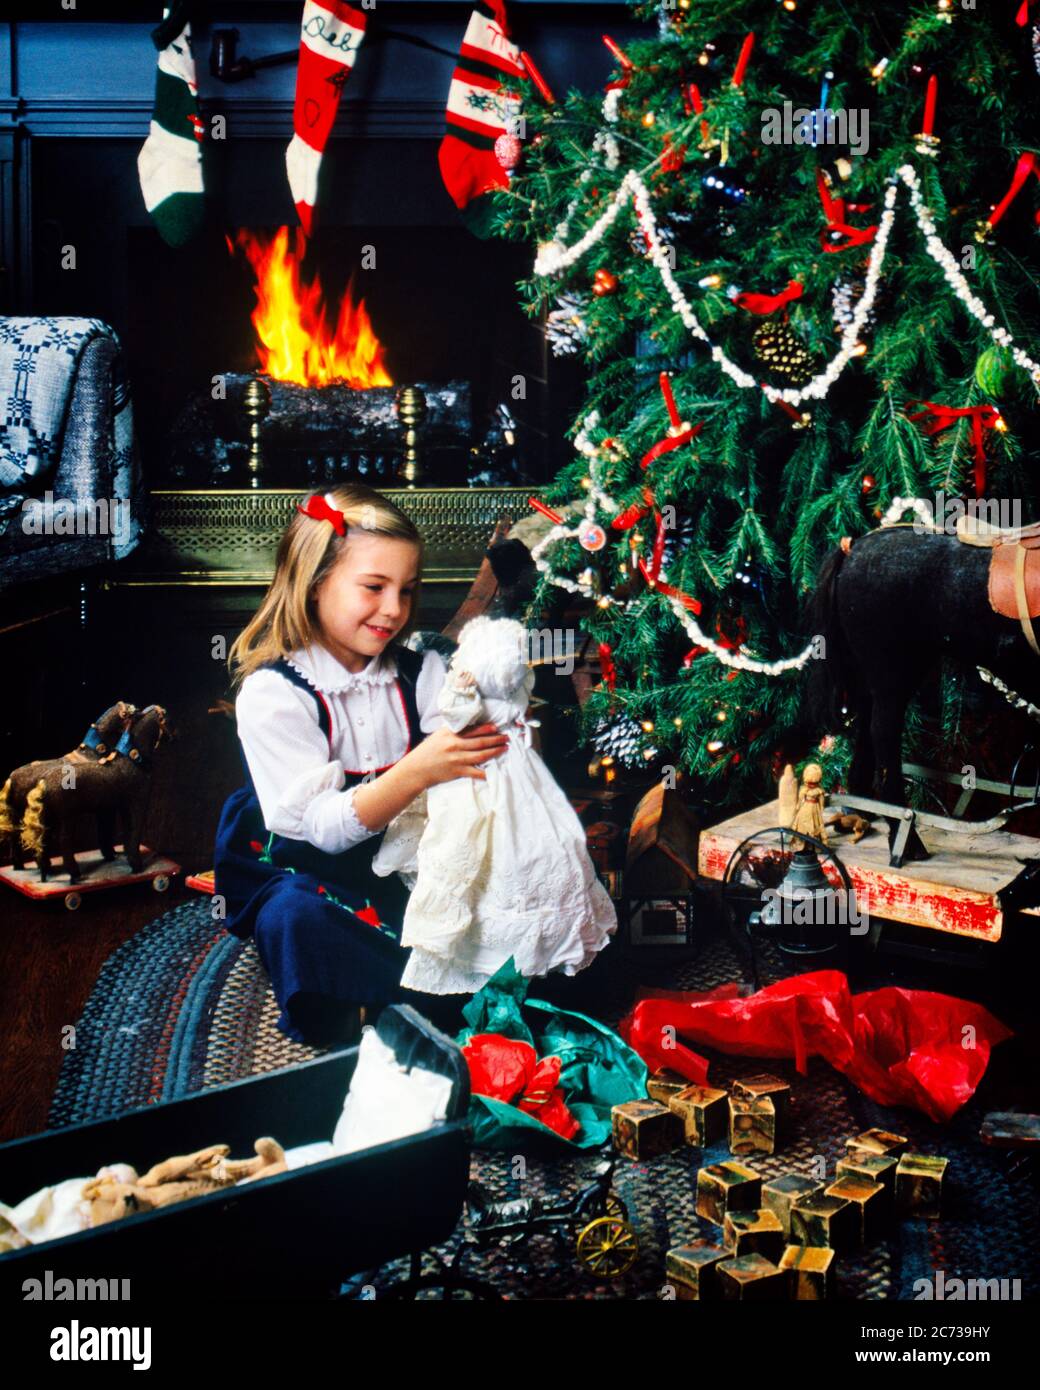 1970s 1980s SMILING BLOND GIRL HOLDING ANTIQUE DOLL SITTING BY TRADITIONAL CHRISTMAS TREE AND FIREPLACE ANTIQUE TOYS ALL AROUND - kx8796 PHT001 HARS CELEBRATION FEMALES HEAT HOME LIFE COPY SPACE HALF-LENGTH INSPIRATION TRADITIONAL CARING AMERICANA DREAMS HAPPINESS DISCOVERY MERRY PORCELAIN EXCITEMENT MODELS DECEMBER CONCEPTUAL DECEMBER 25 WARMTH IMAGINATION STYLISH CHRISTMAS TREE COLLECTIBLES JOYOUS JUVENILES CAUCASIAN ETHNICITY COLLECTIBLE OLD FASHIONED Stock Photo